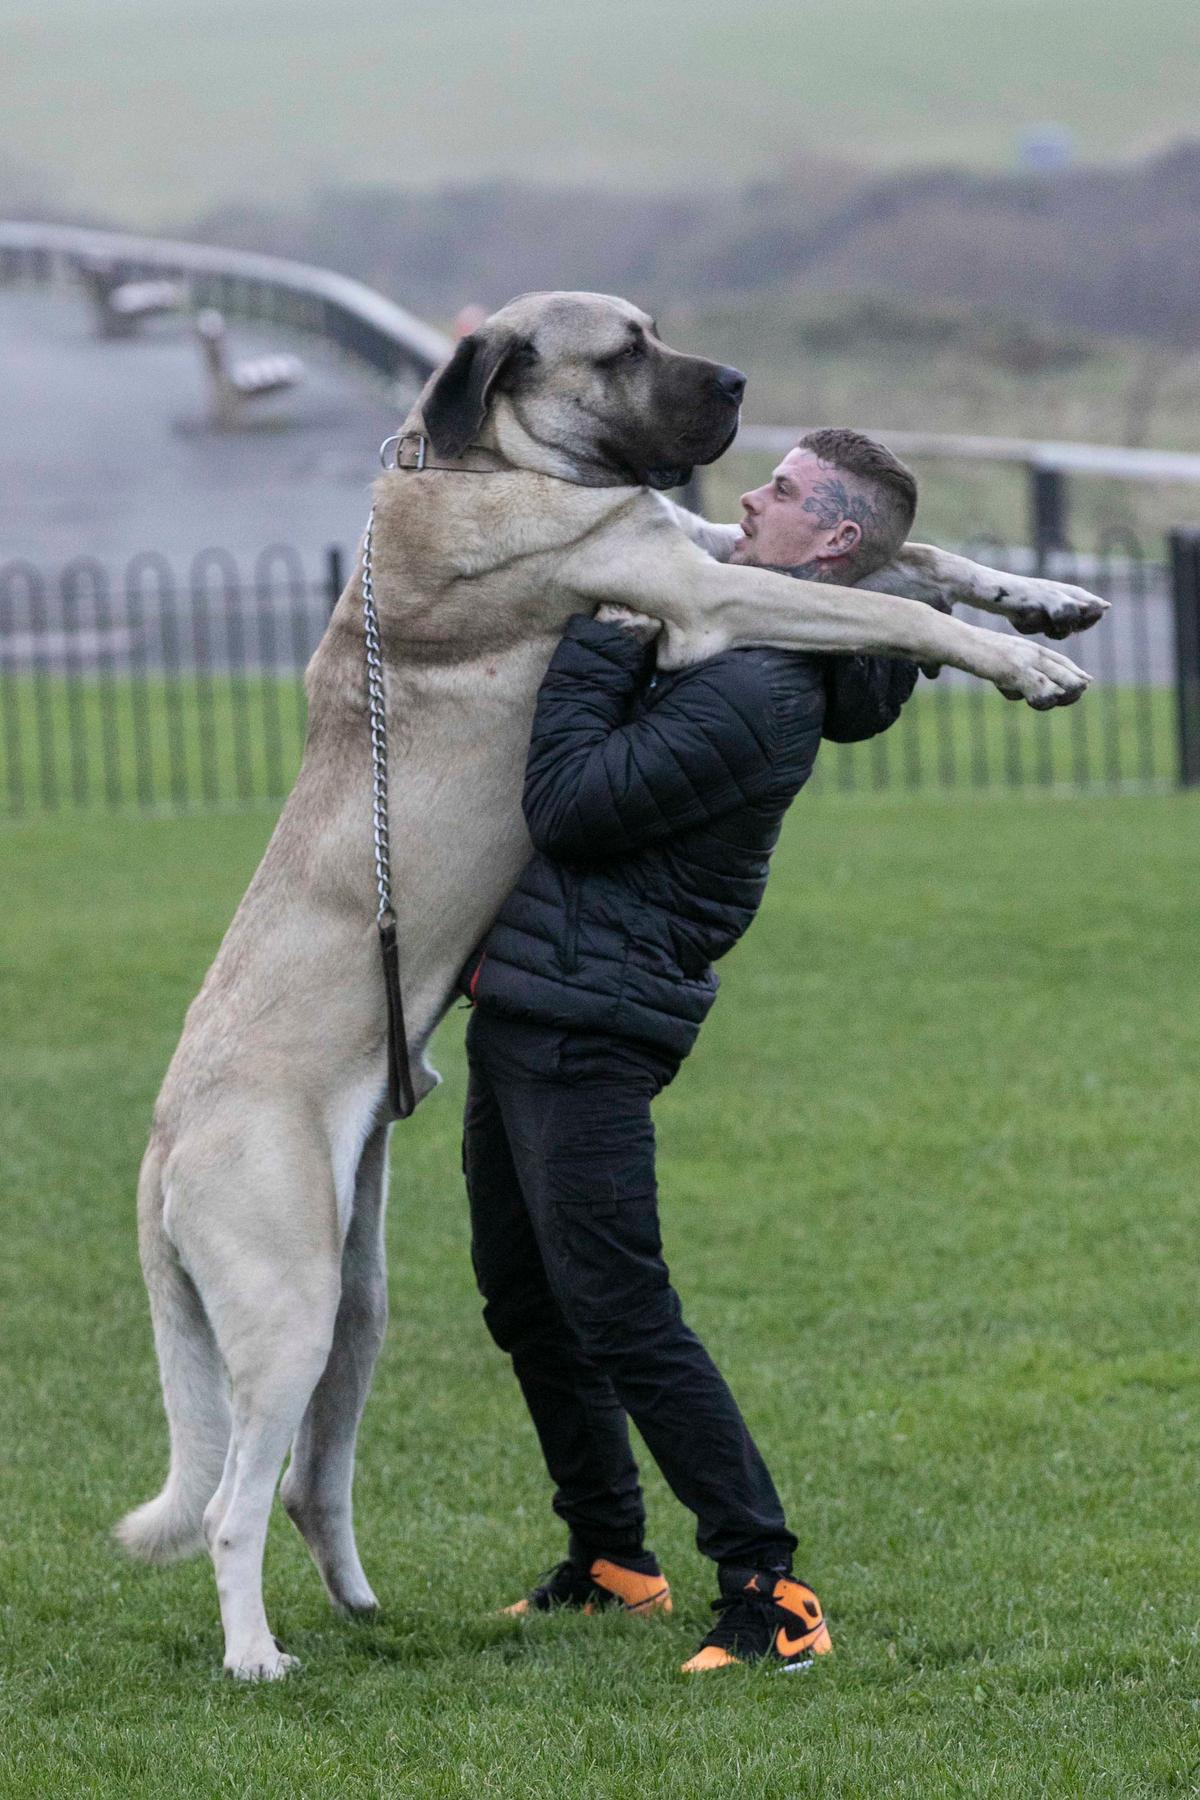 Abu, 2, stands at over 7 feet tall and dwarfs his owner when on his hind legs. (SWNS)